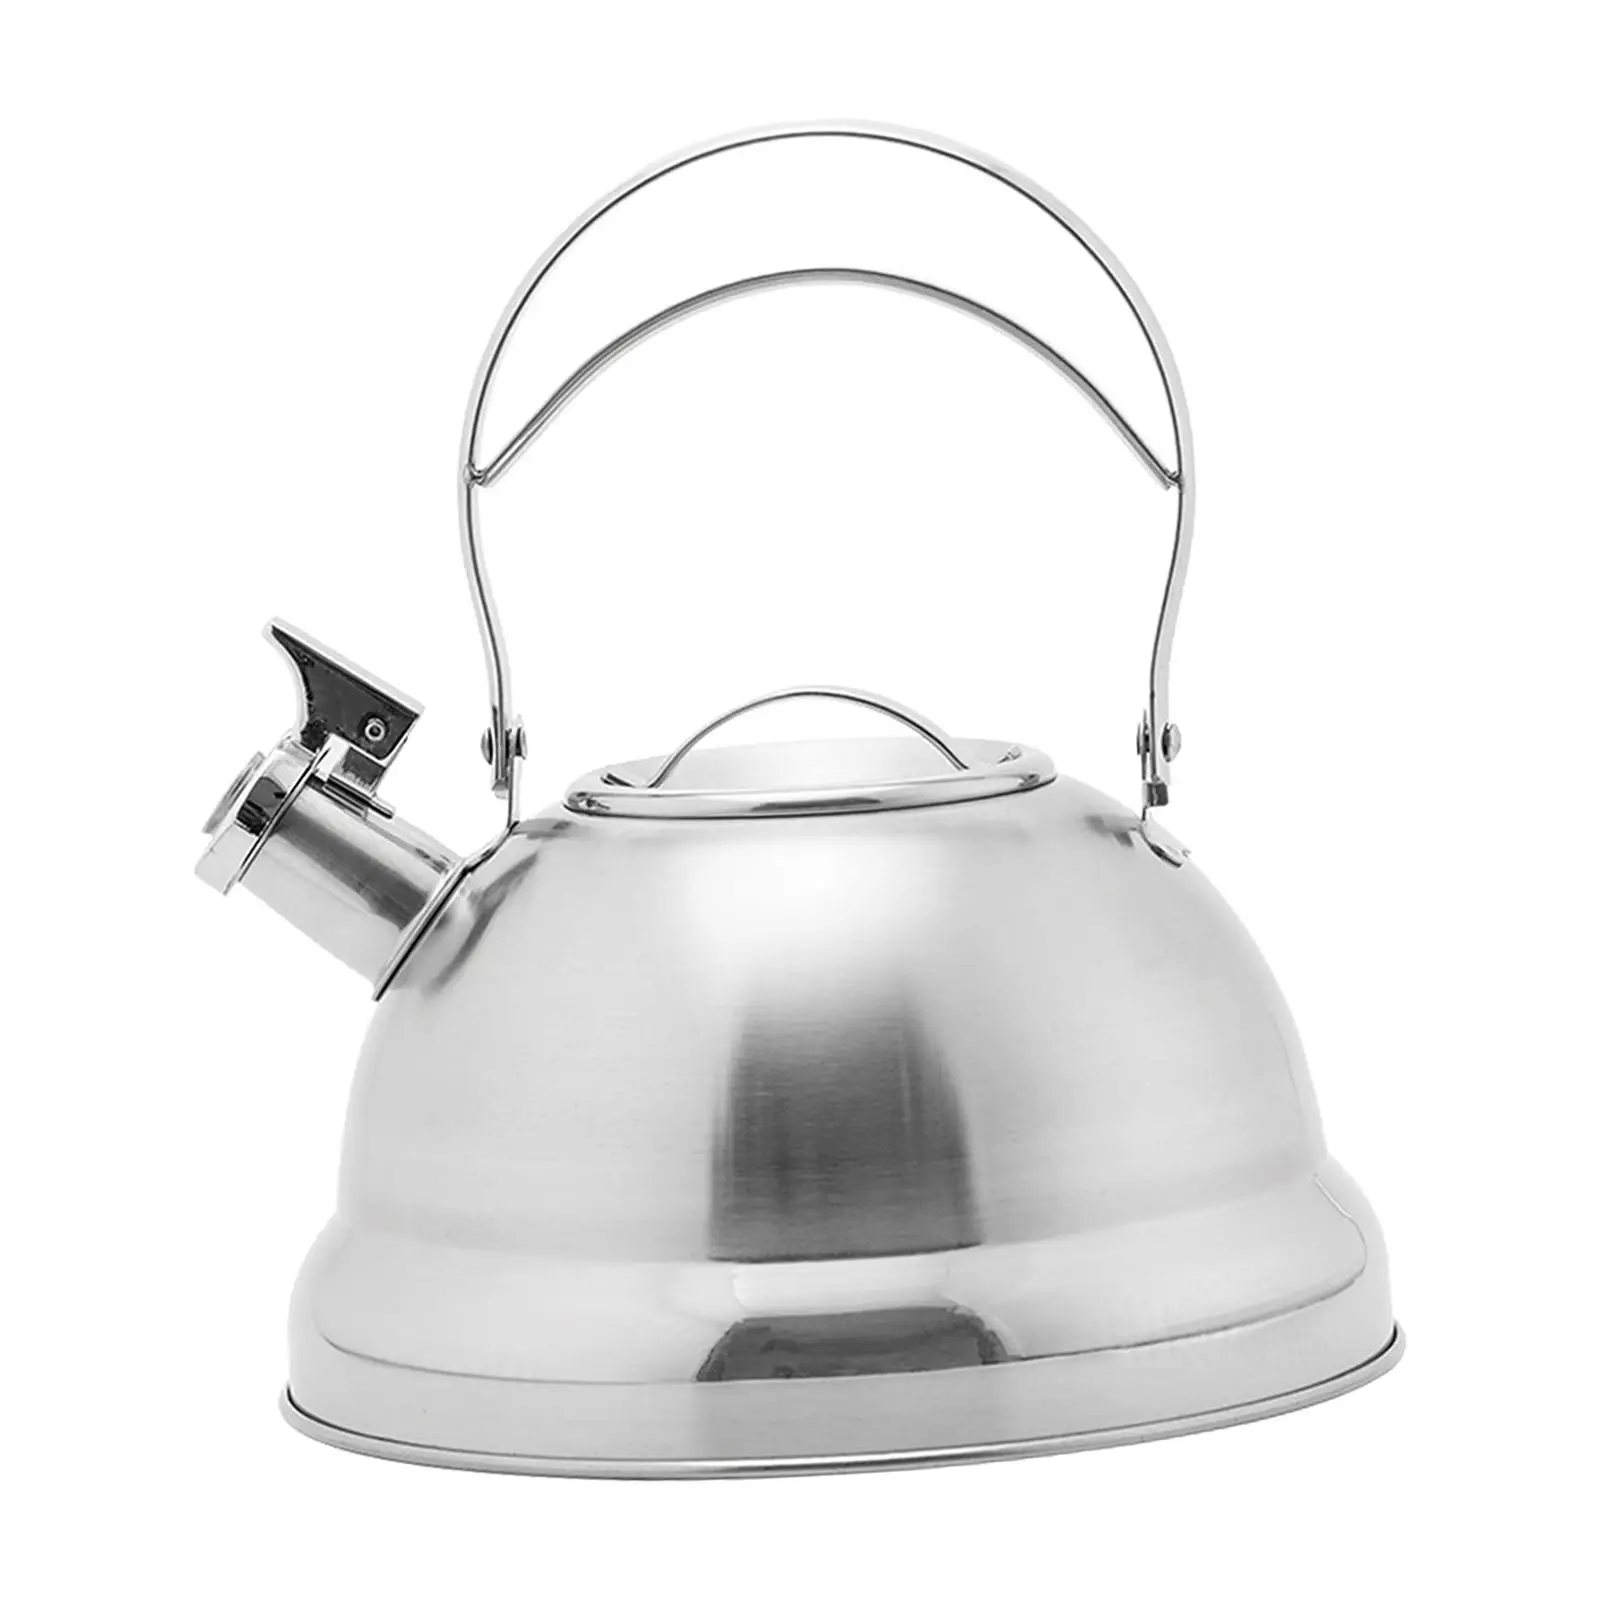 Coffee Tea Kettle 3.5L Stainless Steel Tea Kettle for Home Kitchen Camping